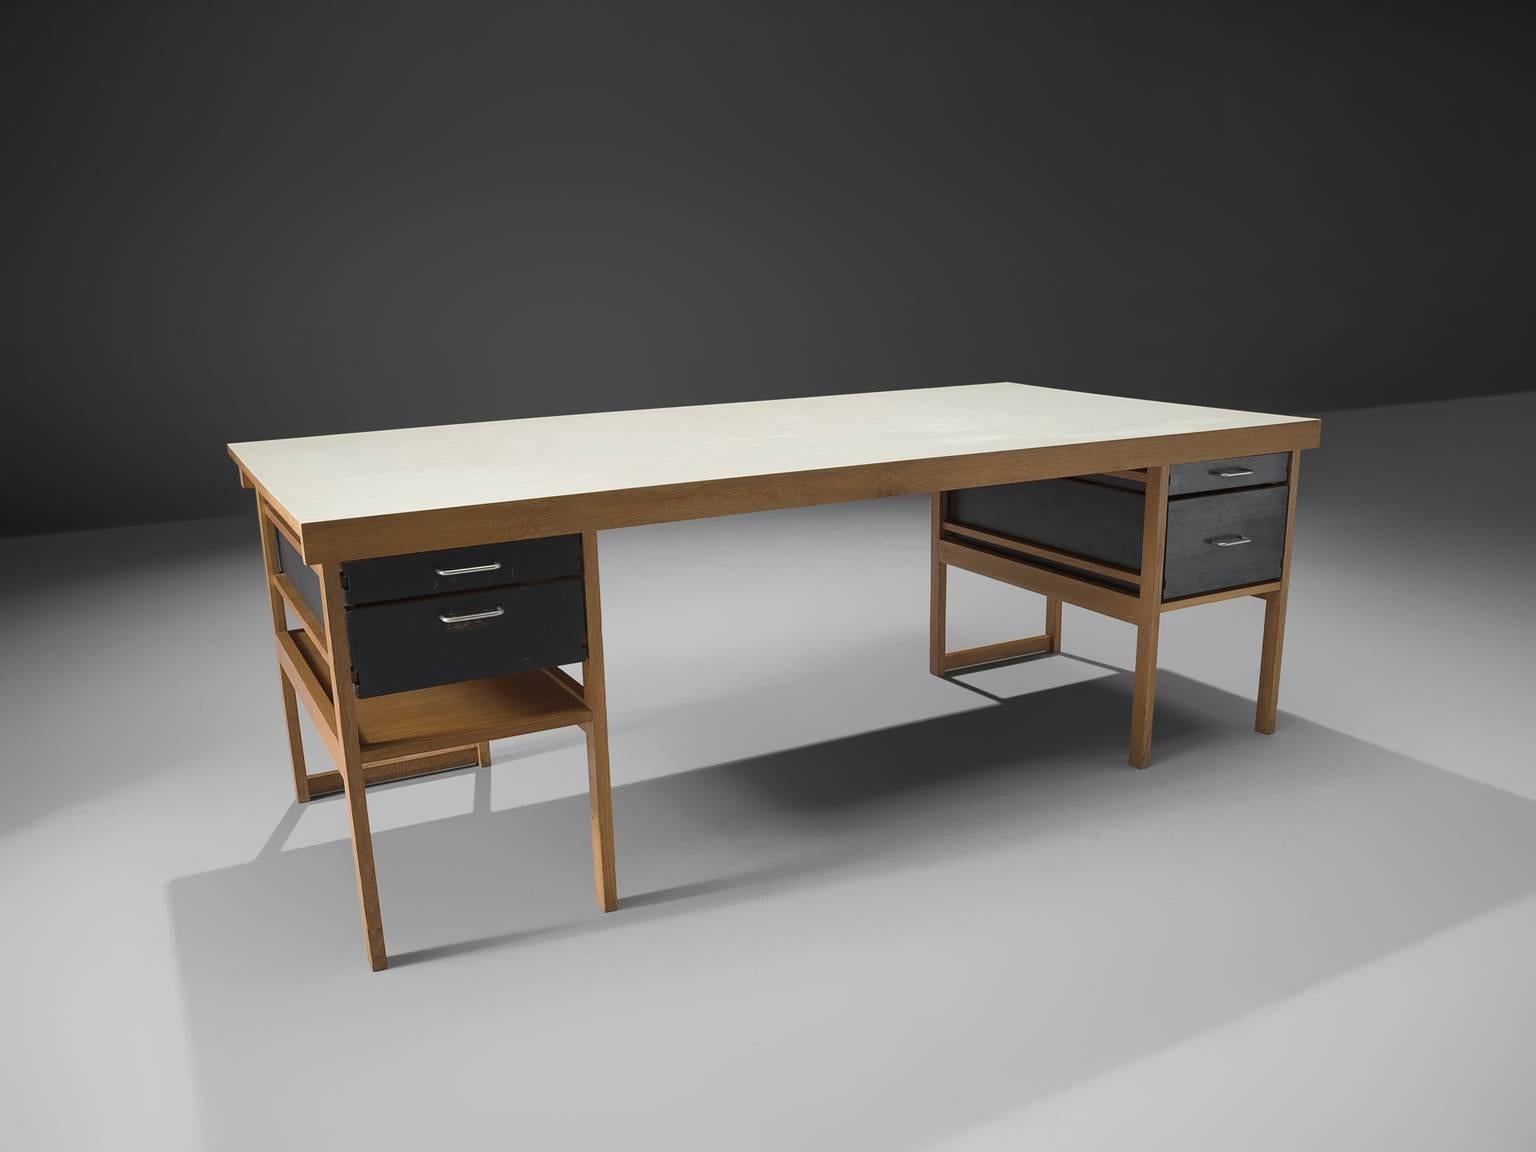 Desk Benedikt Rohner for Oswald, 1965

This desk in natural and lacquered oak is designed by the Swiss designer Benedikt Rohner for Oswald, 1965. The most interesting thing about this desk is perhaps its open construction. Nothing is hidden, all